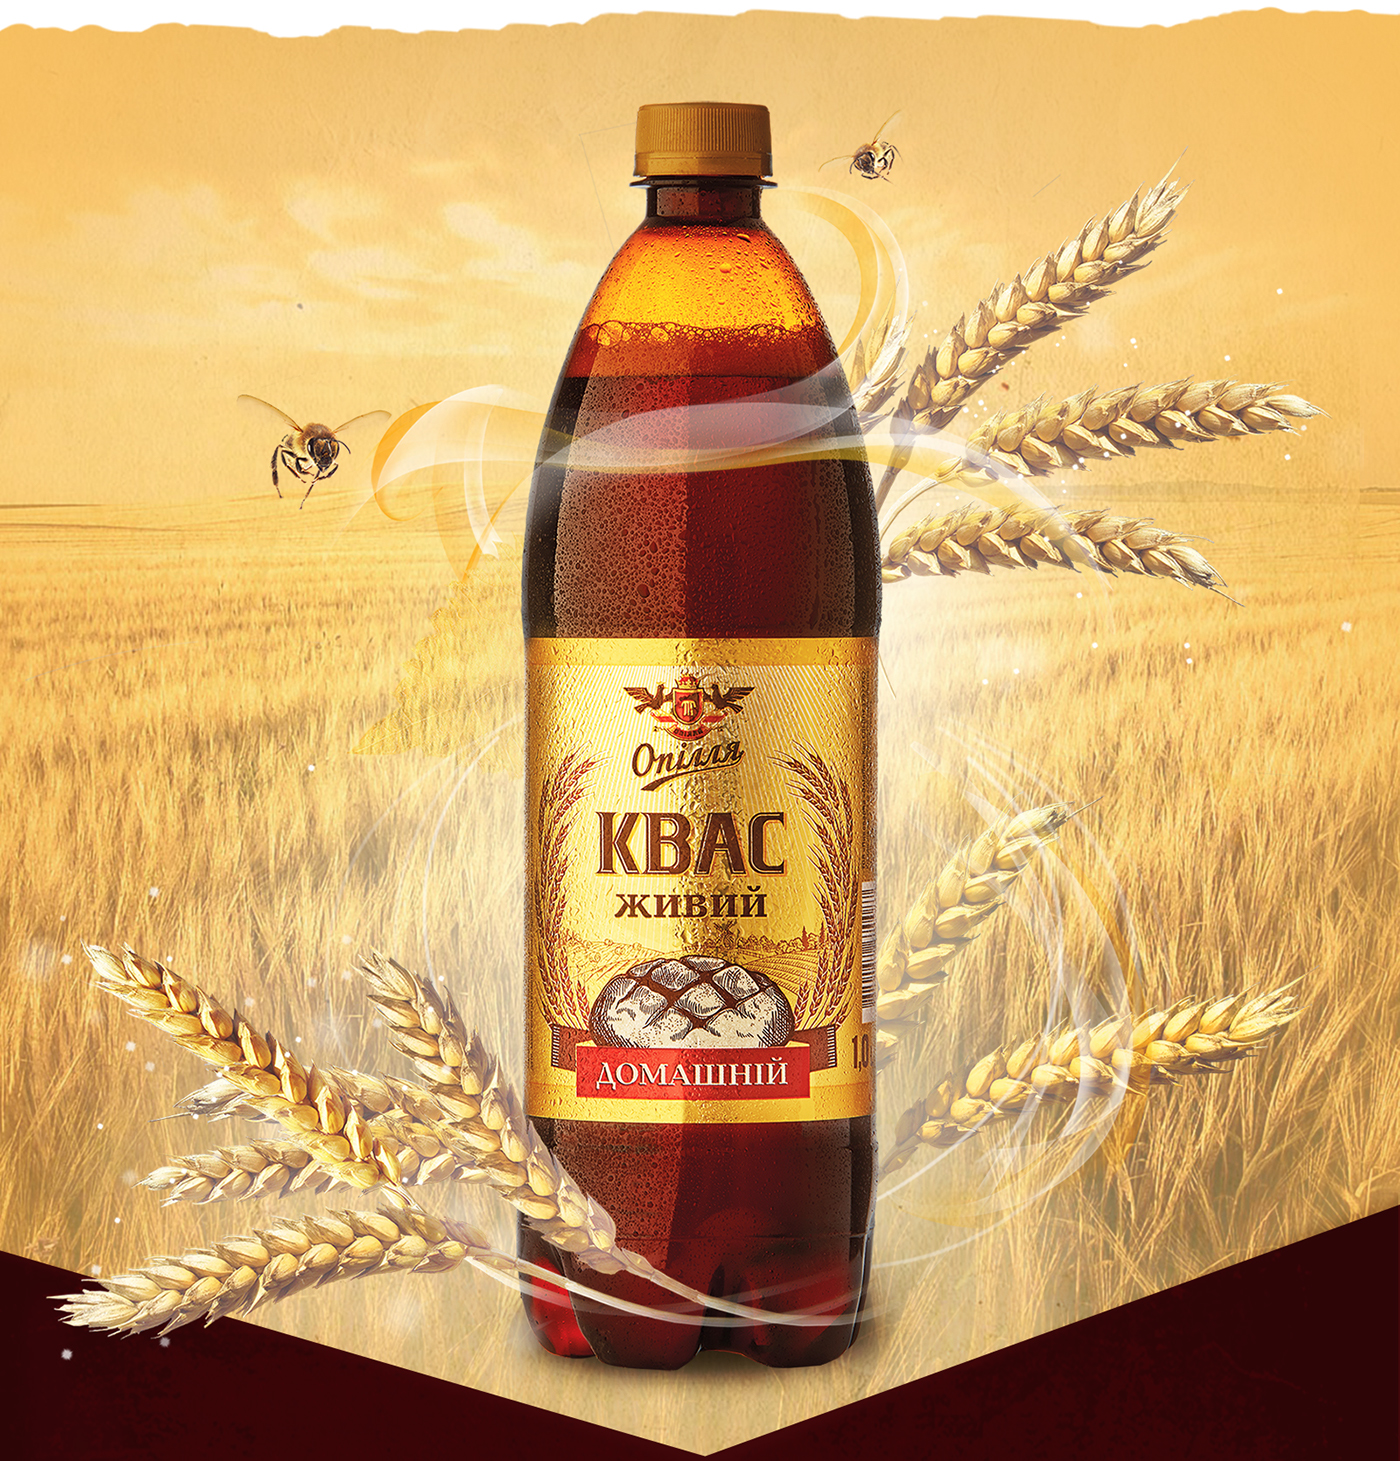 logo Packaging Label kvass Project amazing gorgeous craft action brand